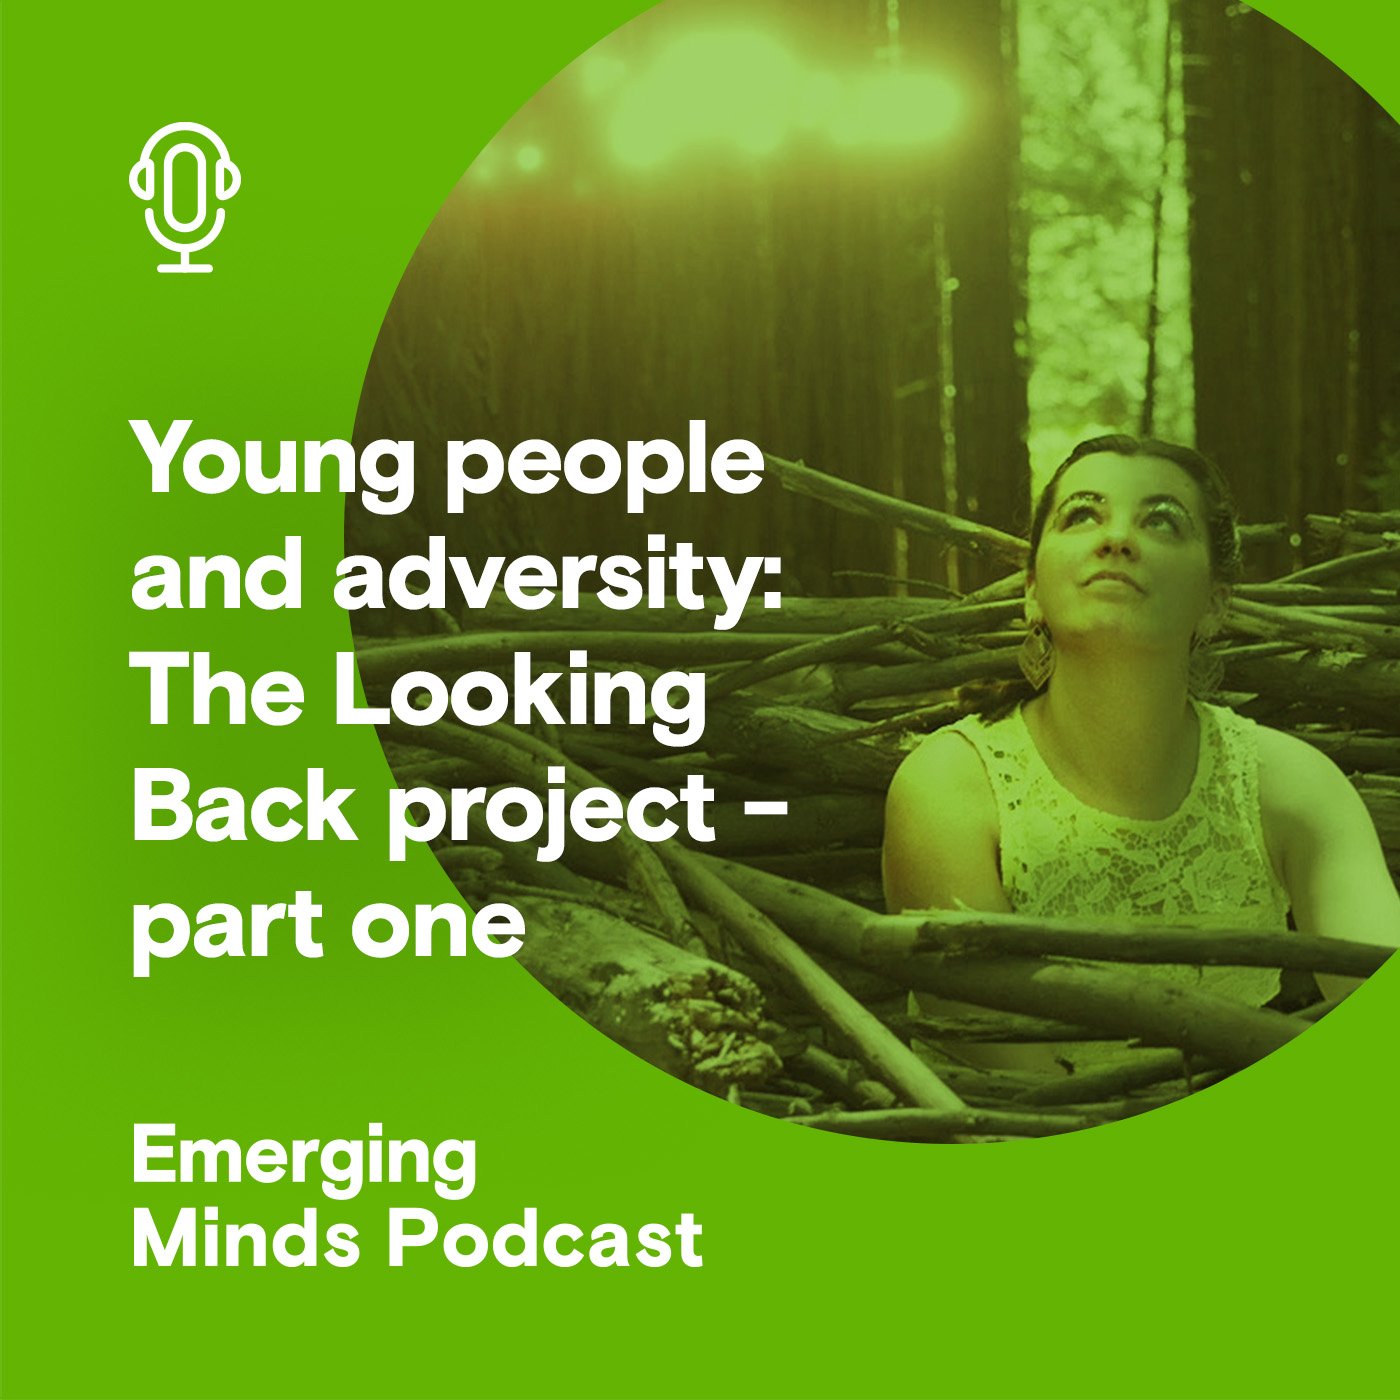 Young people and adversity: The Looking Back project - part one